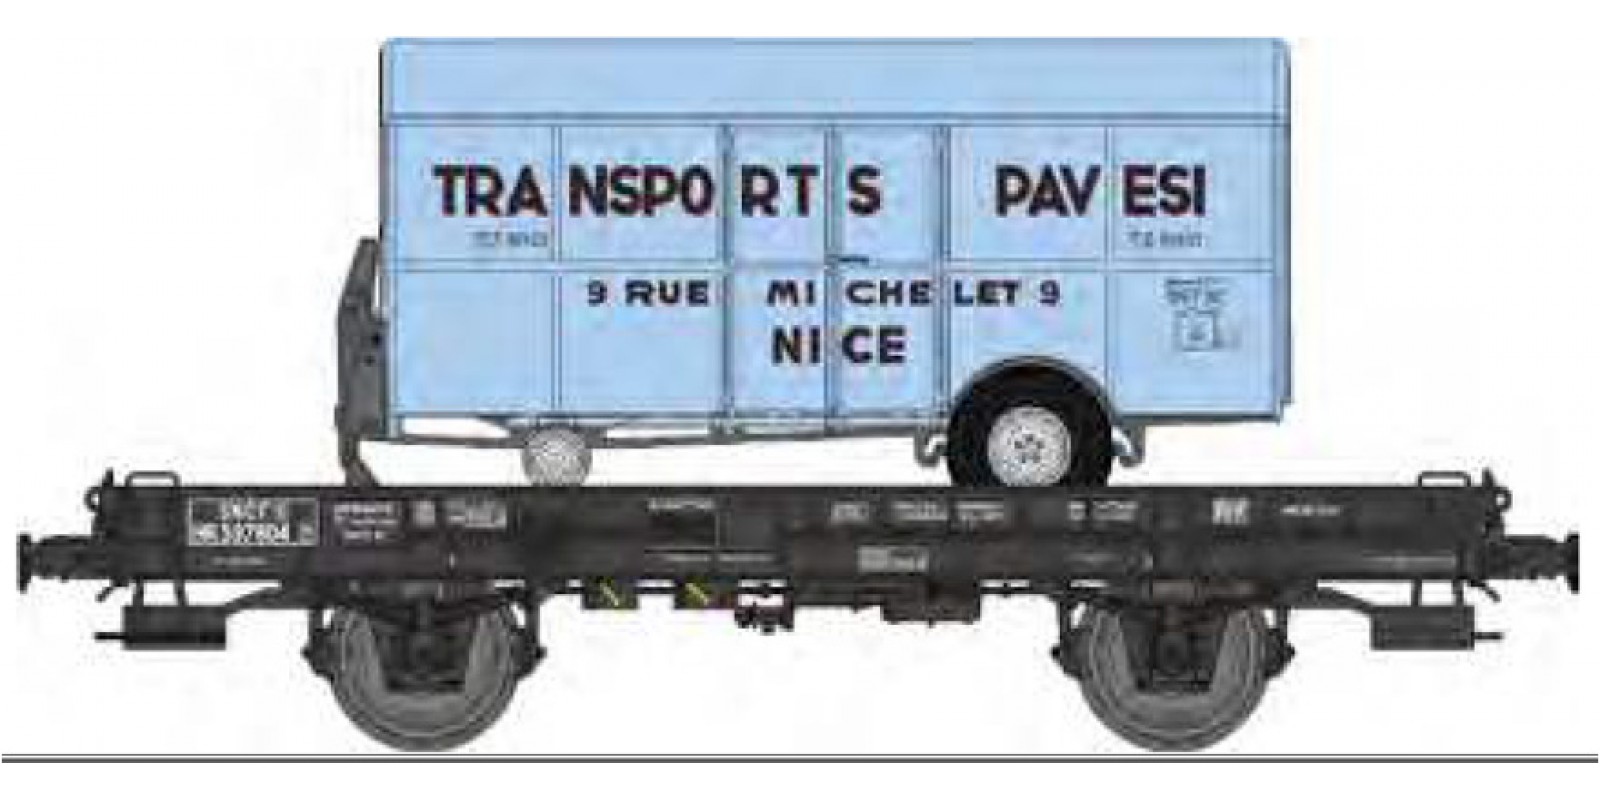 REWB648 Heavy truck loaded with tank trailer of the SNCF